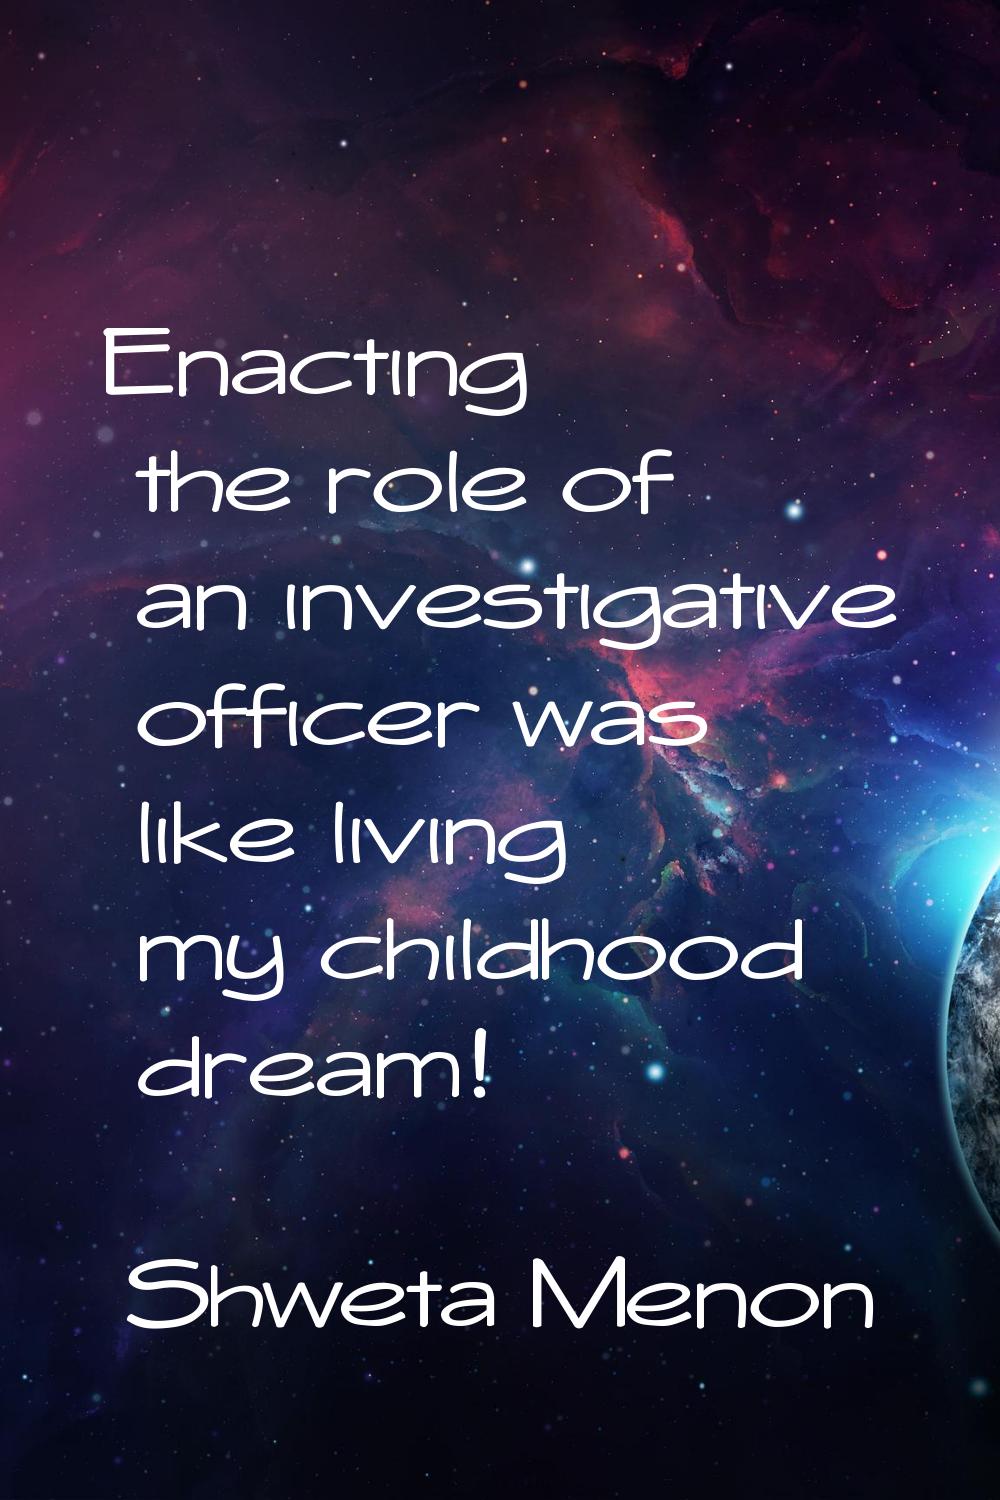 Enacting the role of an investigative officer was like living my childhood dream!